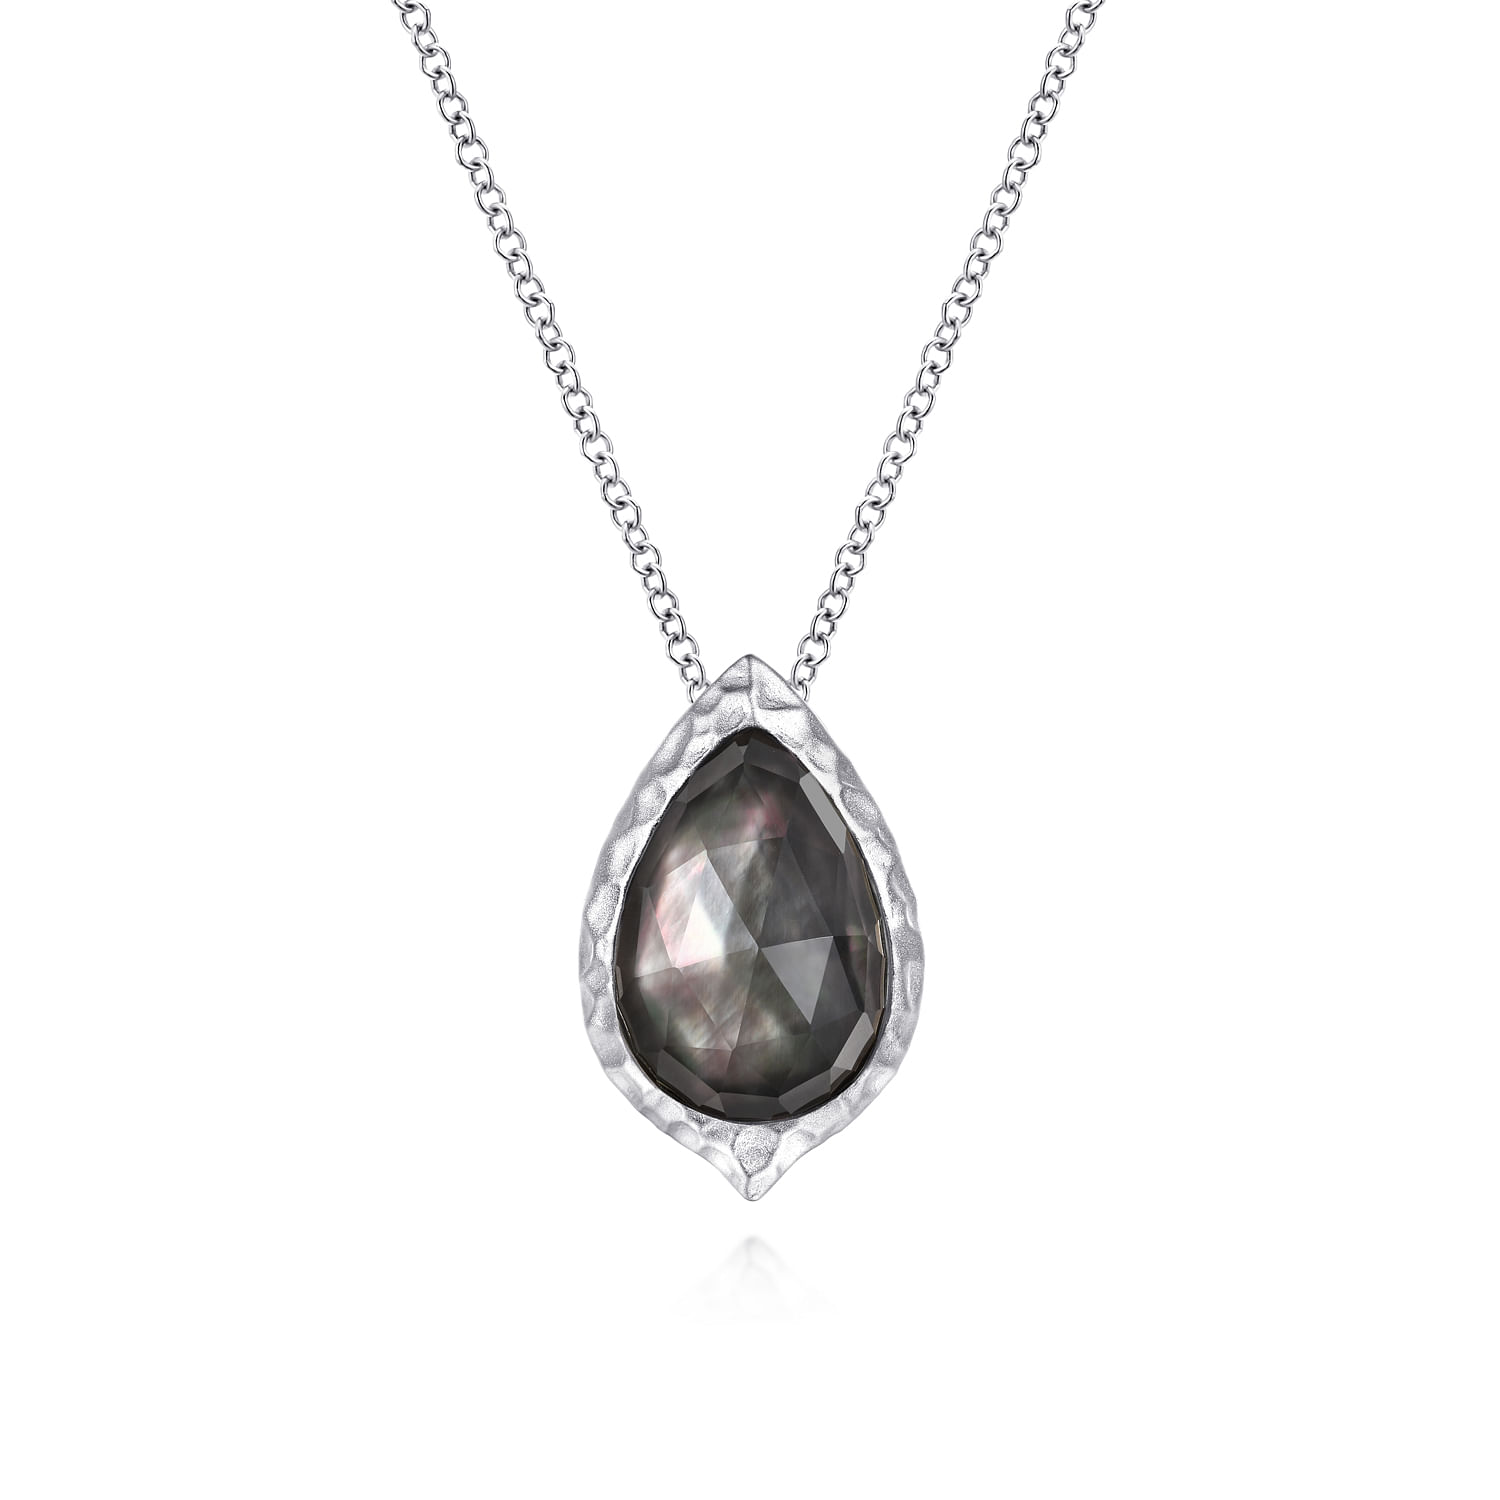 925 Sterling Silver Hammered Pear Shaped Rock Crystal   Black Mother of Pearl Pendant Necklace